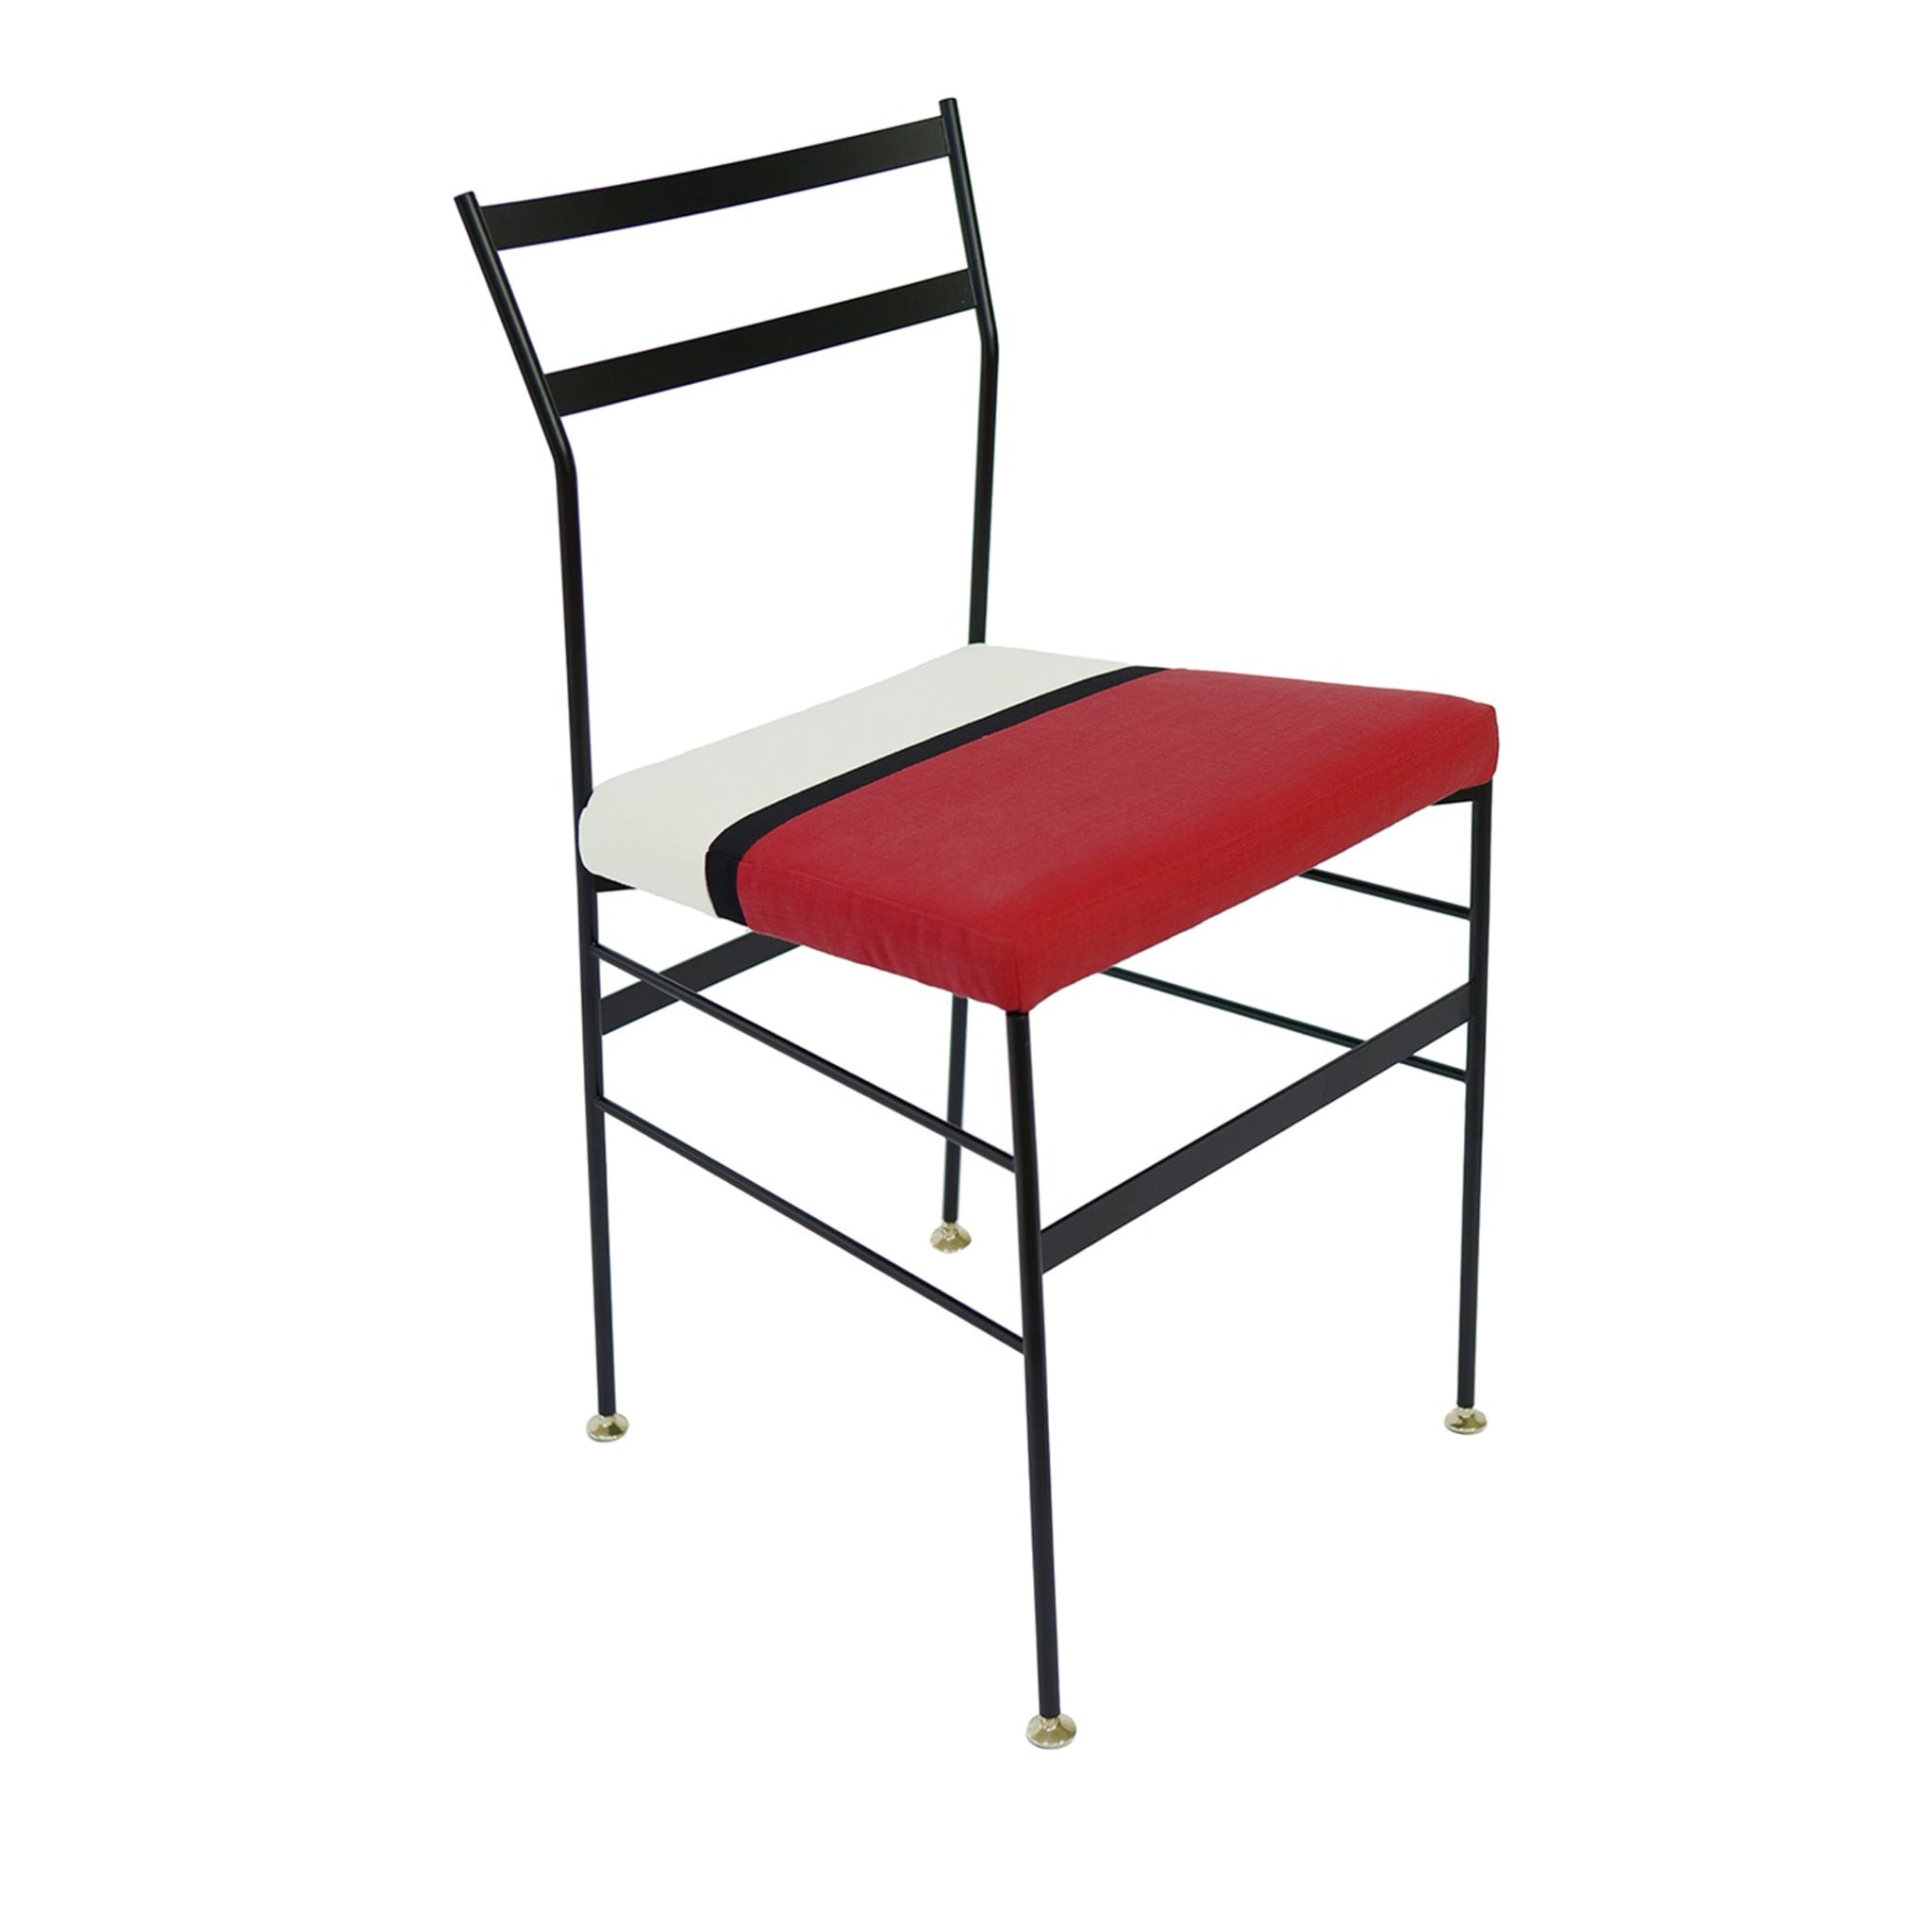 Set of 2 Pontina Bruxel Red and White Chair - Main view